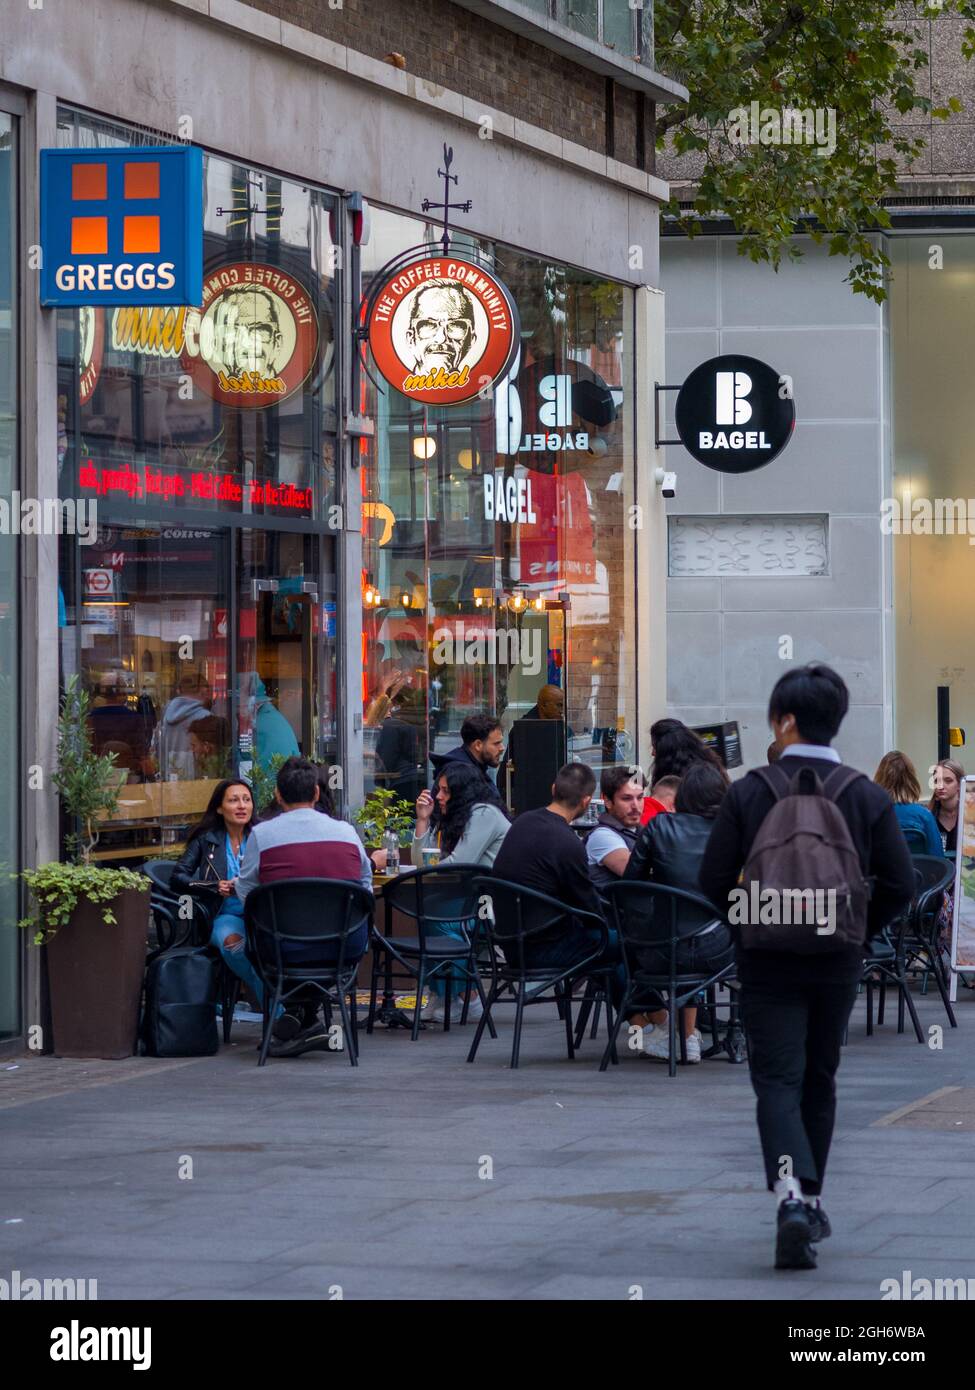 London Cafes - Fast Food & Coffee Shops in der Tottenham Court Road Central London - Greggs, Mikel Coffee & B Bagel Stores. London Fast Food Coffee. Stockfoto